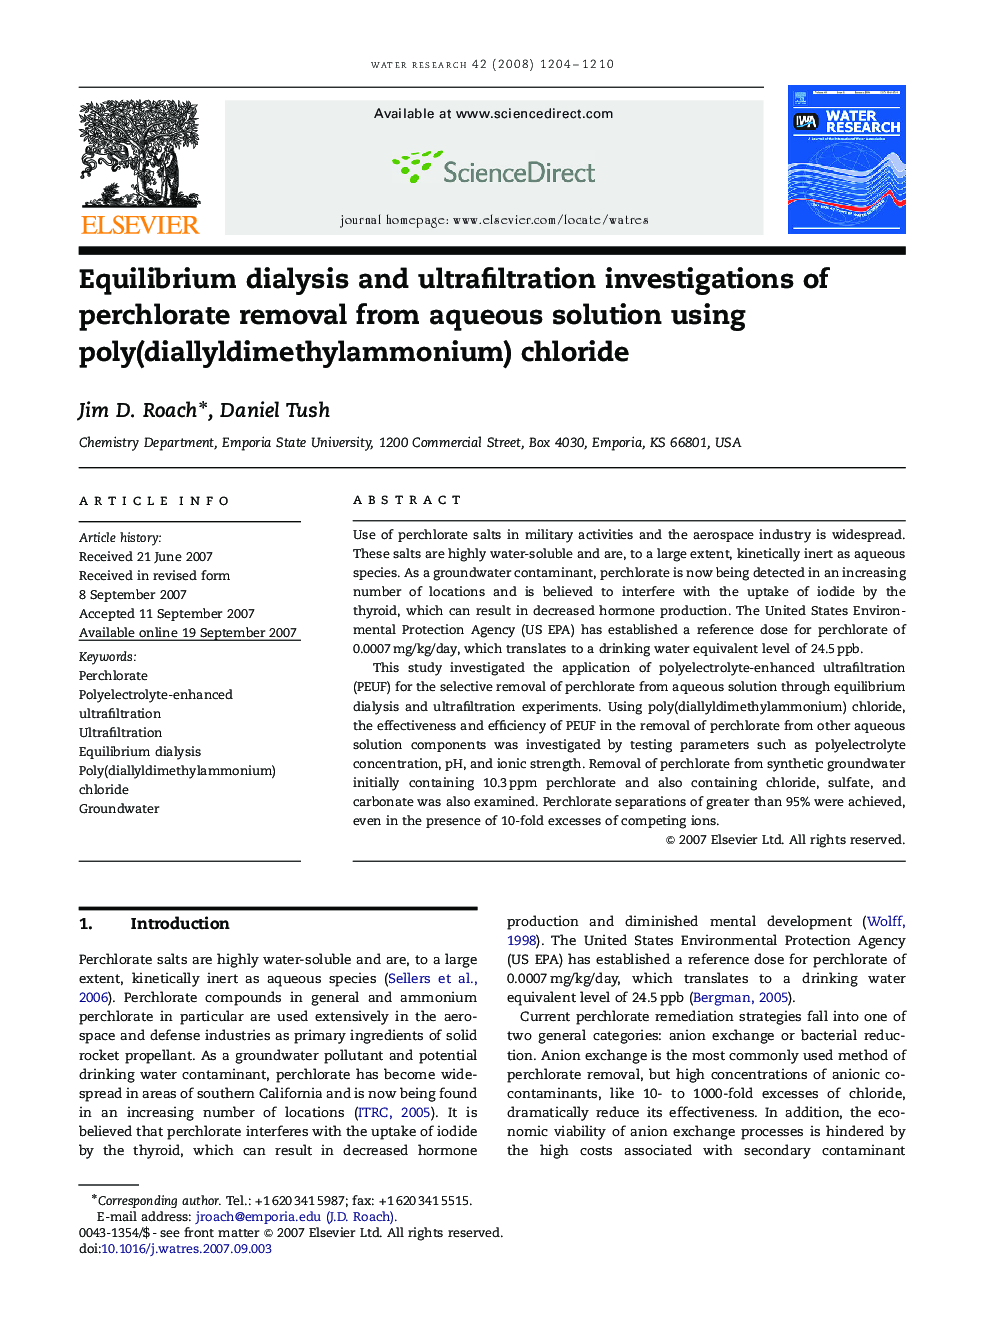 Equilibrium dialysis and ultrafiltration investigations of perchlorate removal from aqueous solution using poly(diallyldimethylammonium) chloride